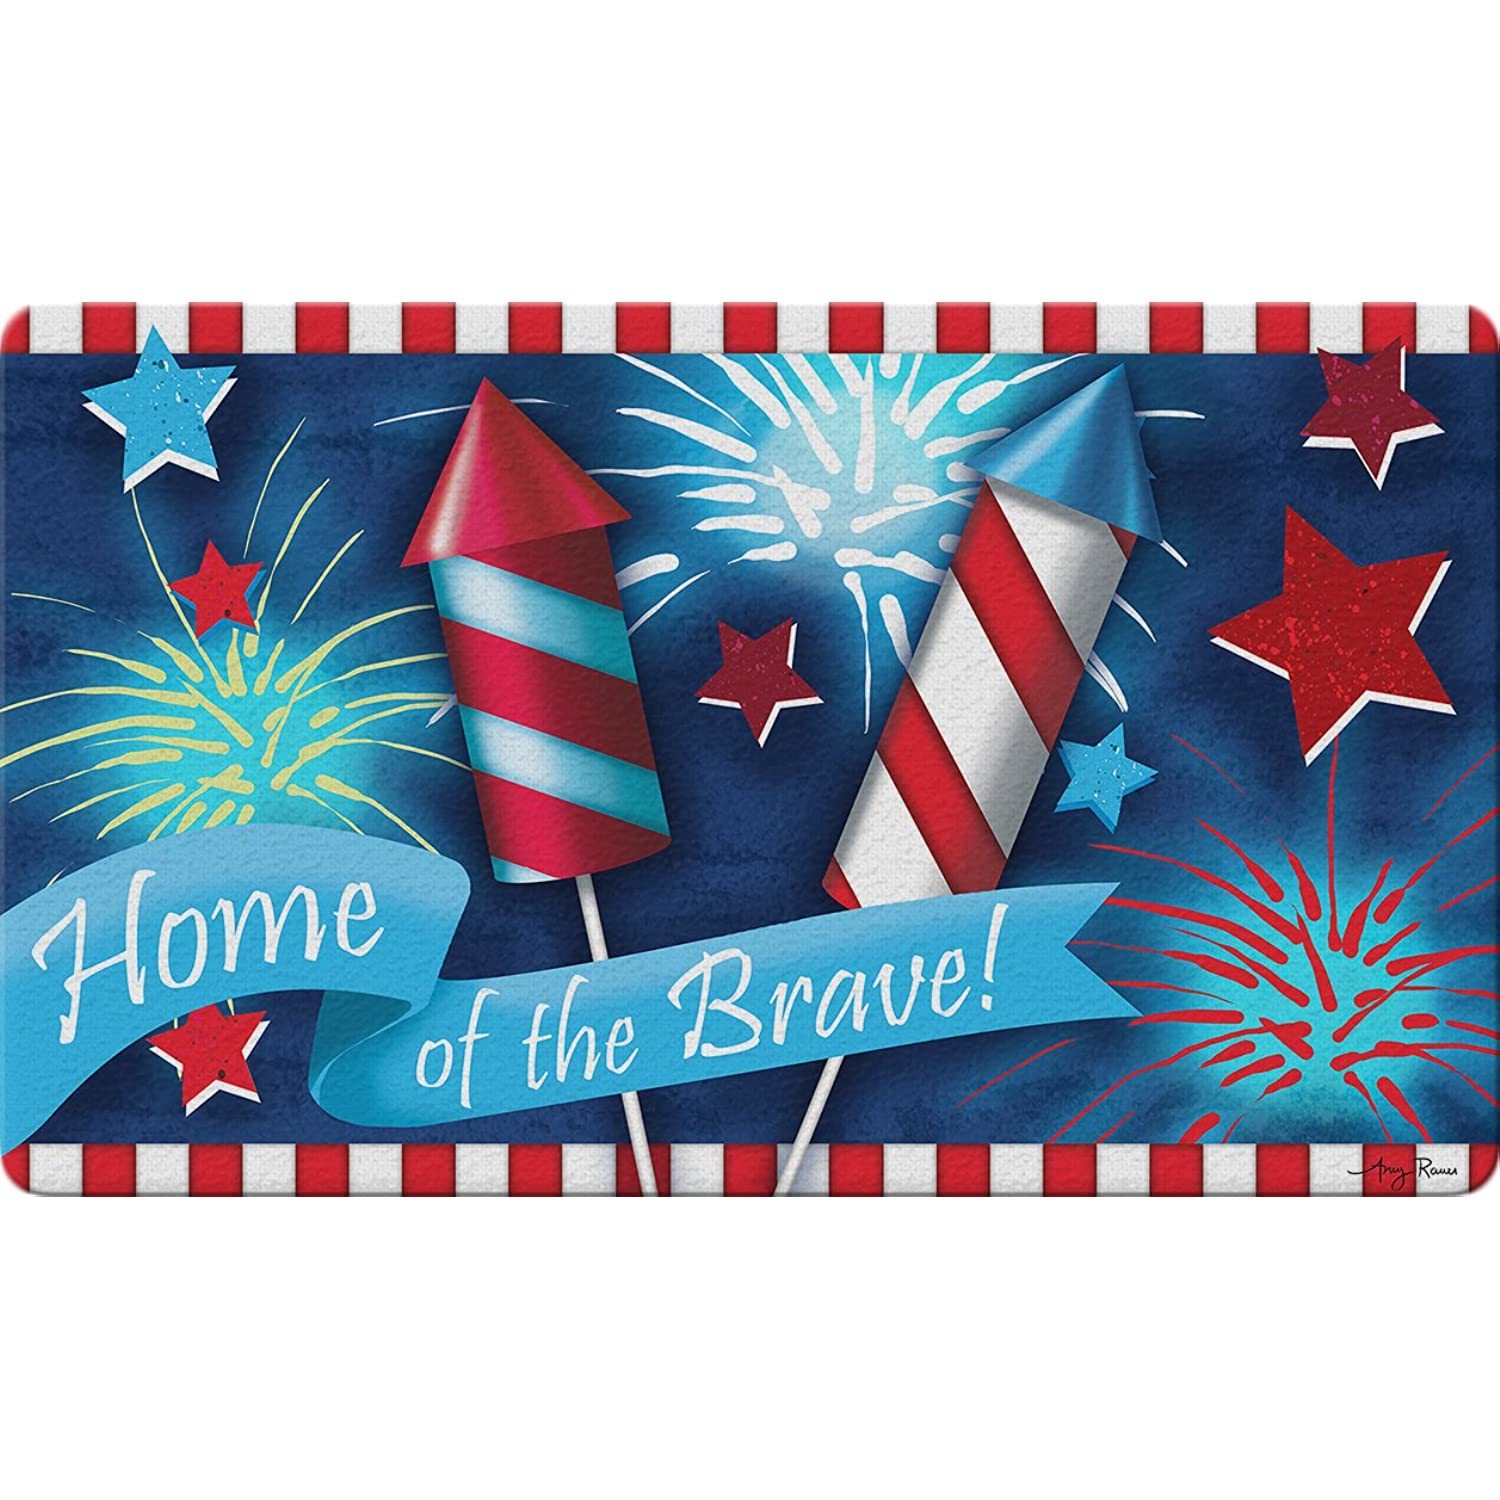 Toland Home Garden 800249 Home of The Brave Summer Door Mat 18x30 Inch 4th of Ju - $39.99